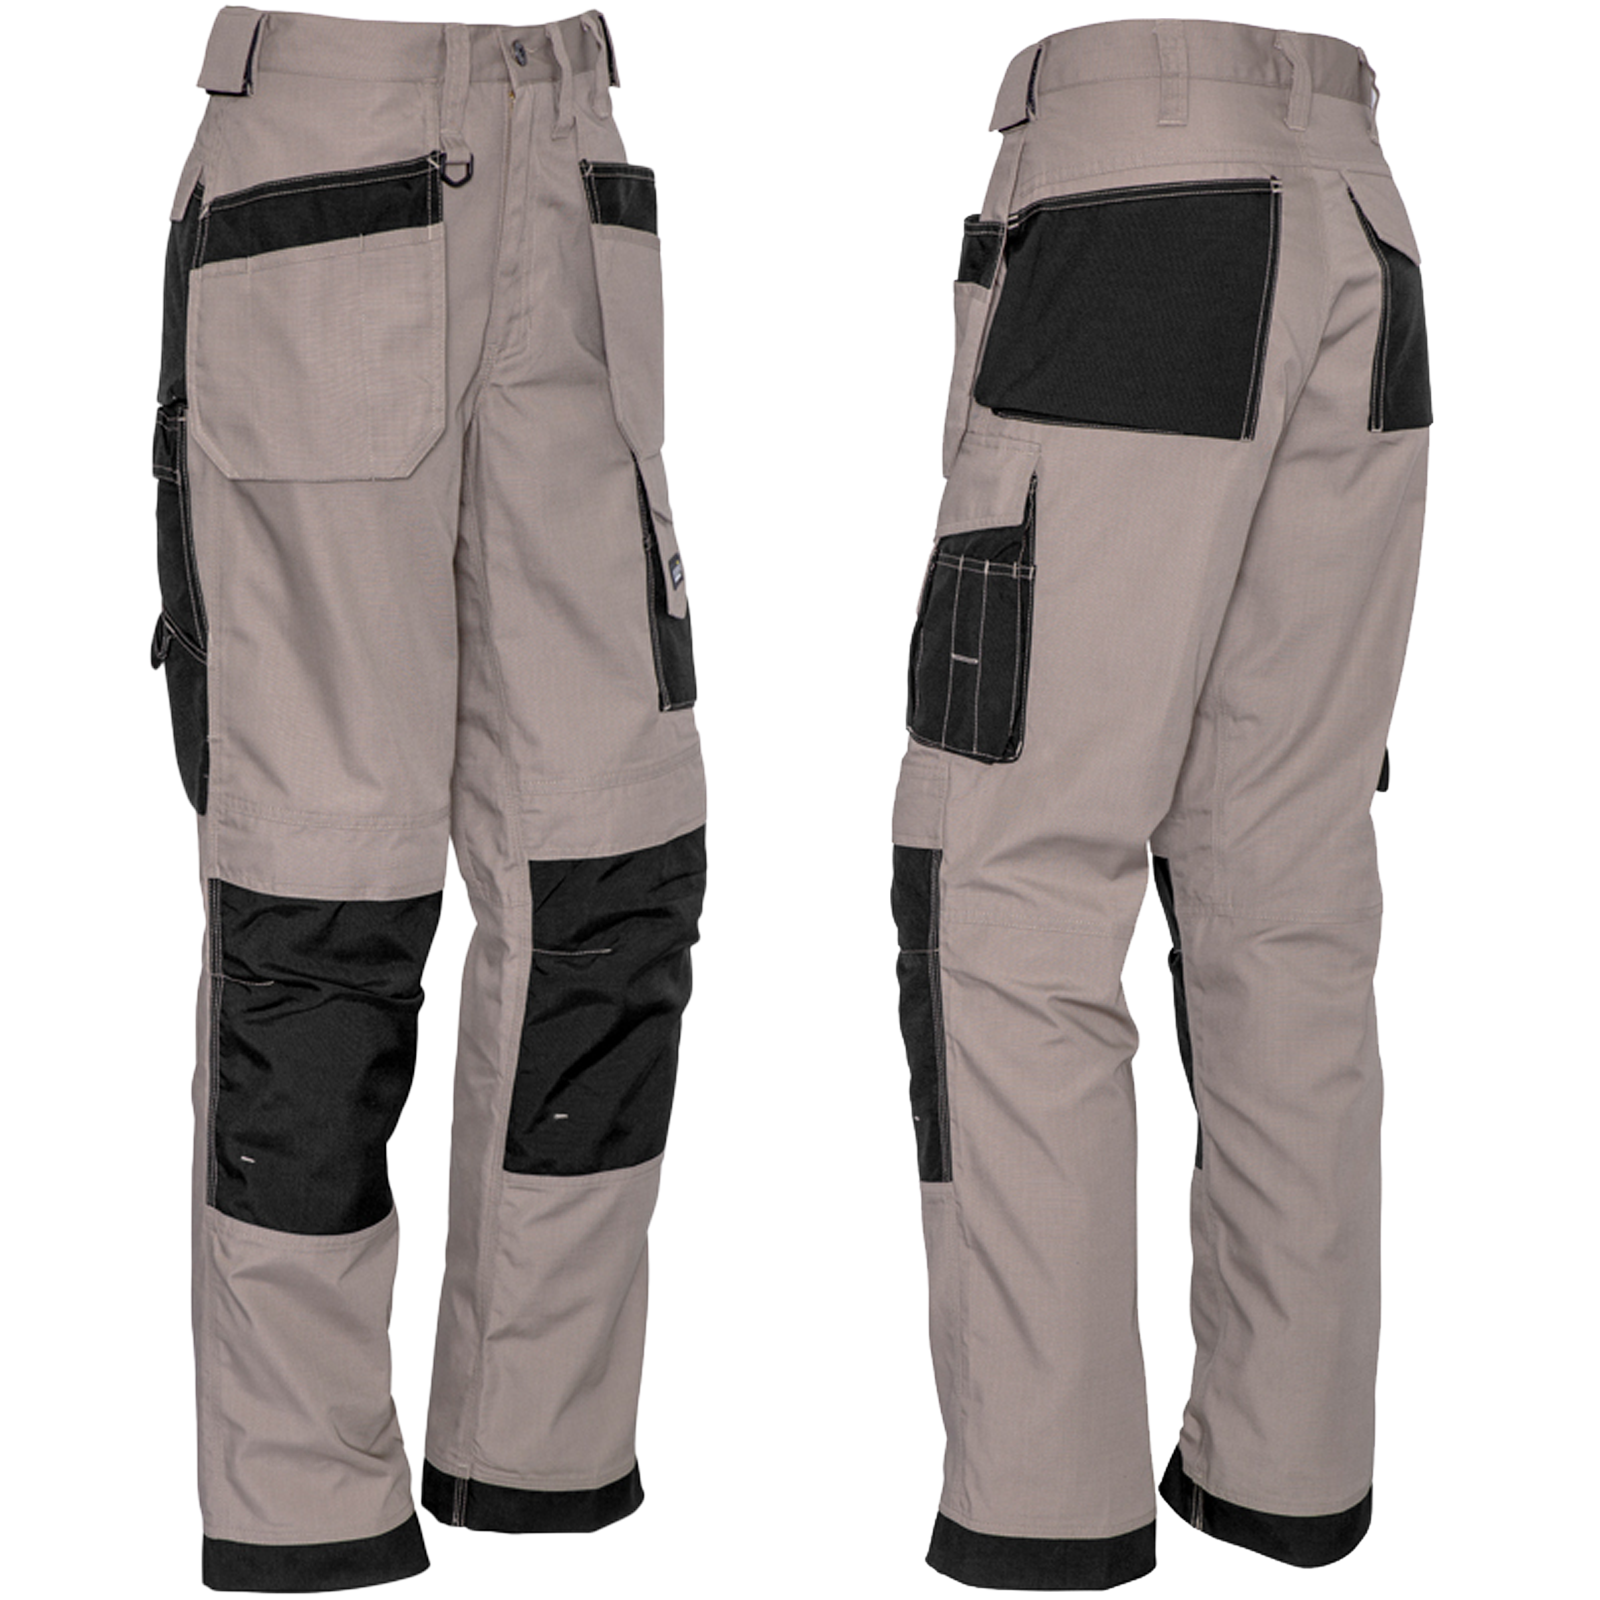 Mens Trousers for sale  eBay  Workwear trousers Work trousers Mens  work pants